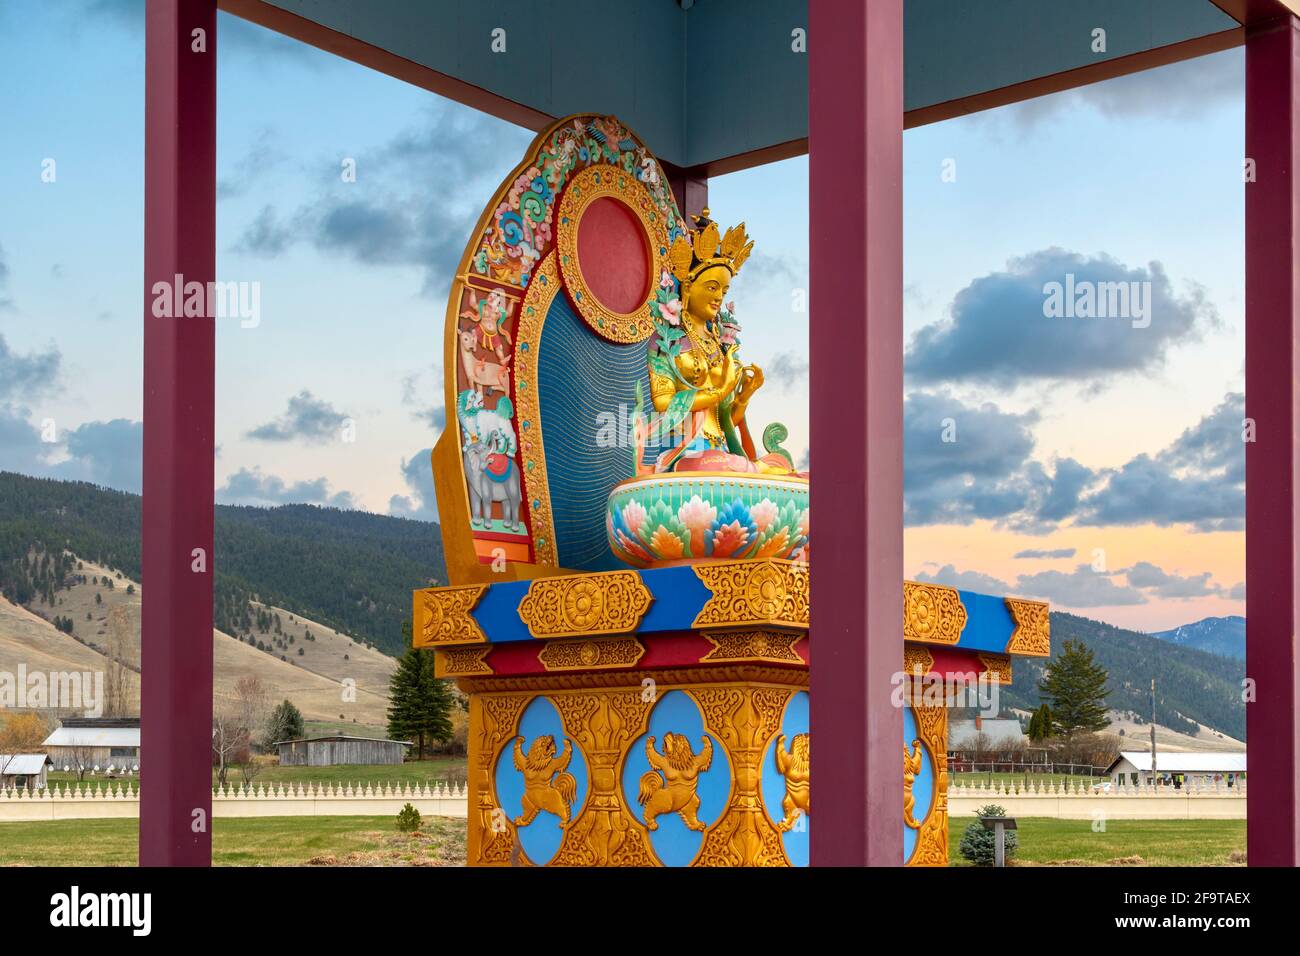 A colorful figurine of Yum Chenmo, or Prajnaparamita, the Great Mother in Buddhism culture at the city of Arlee, Montana, USA Stock Photo